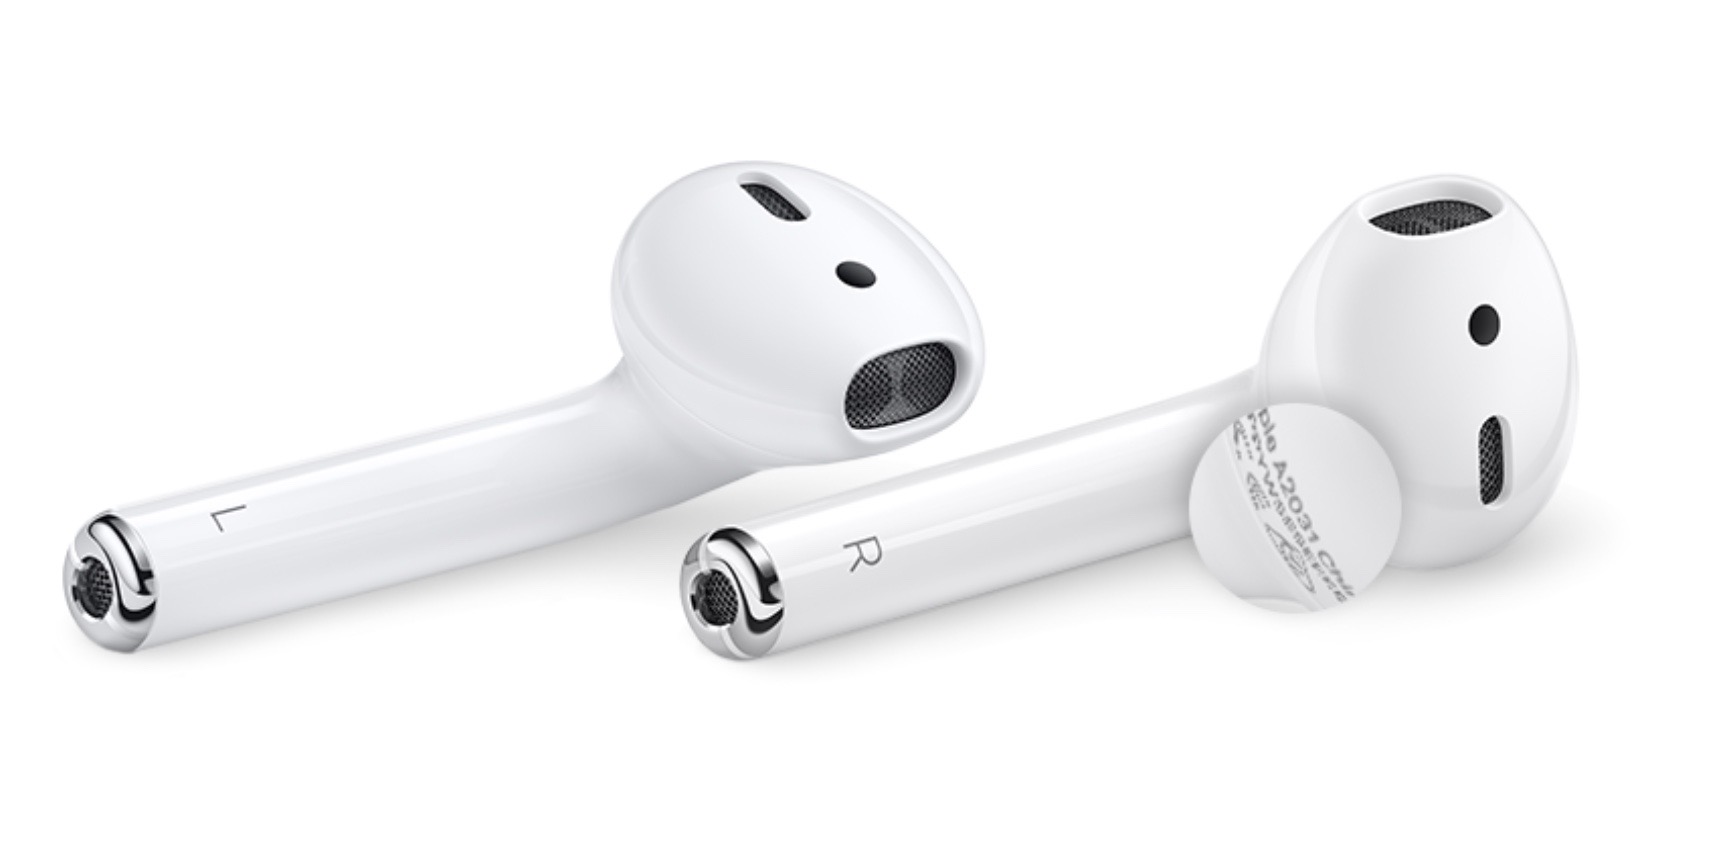 How to check the model of your AirPods and charging case - 9to5Mac